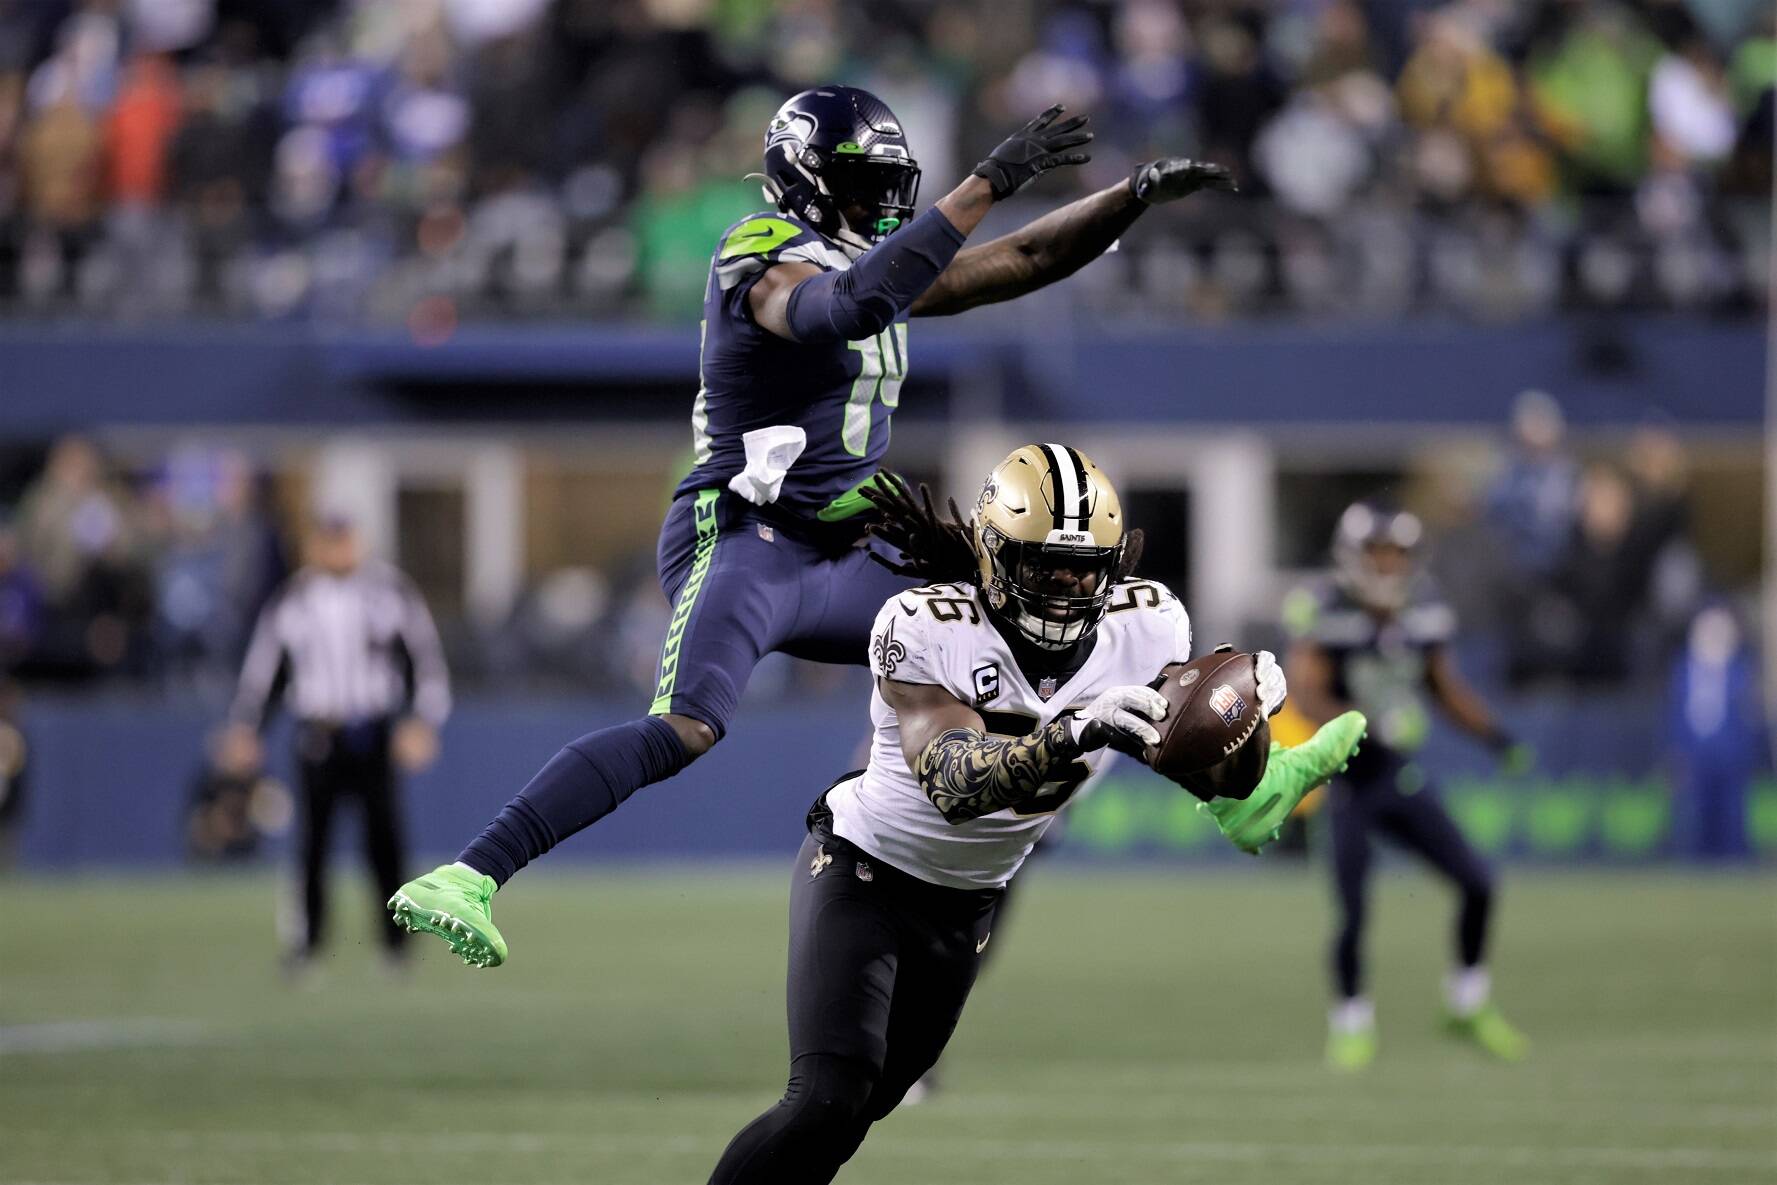 New Orleans Saints’ Demario Davis (56) breaks up a pass intended for Seattle Seahawks’ DK Metcalf in the final minute of an NFL football game Monday in Seattle. The Saints won 13-10. (John Froschauer/The Associated Press)